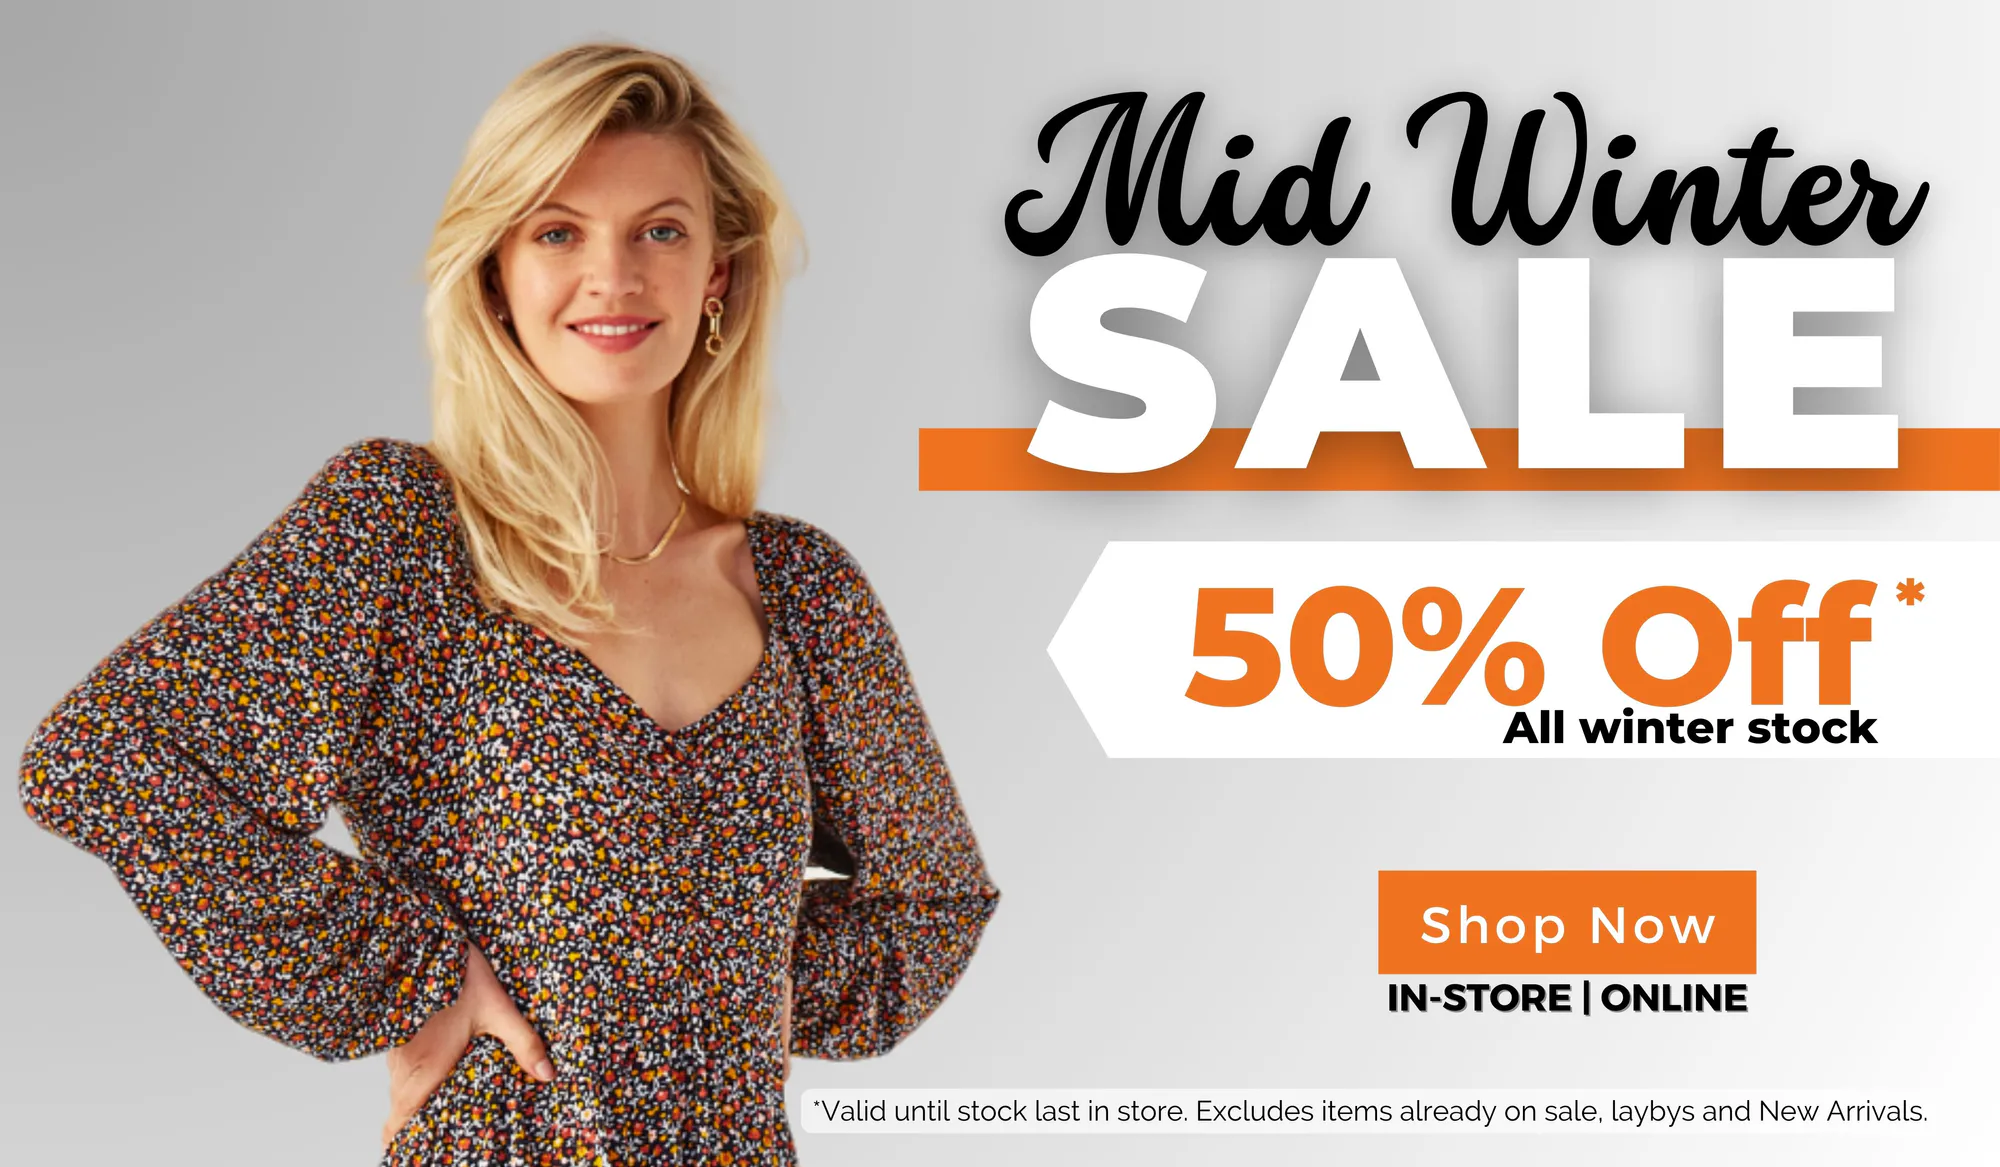 Winter Sale, Sale 50OFF, Winter Collection, Mid Winter Sale, womens' clothing, Sale in Nelson City, Winter Collections - Jumper, Jersey, Top, pants, leggings, Dress, Shorts, Jackets at Beetees Nelson